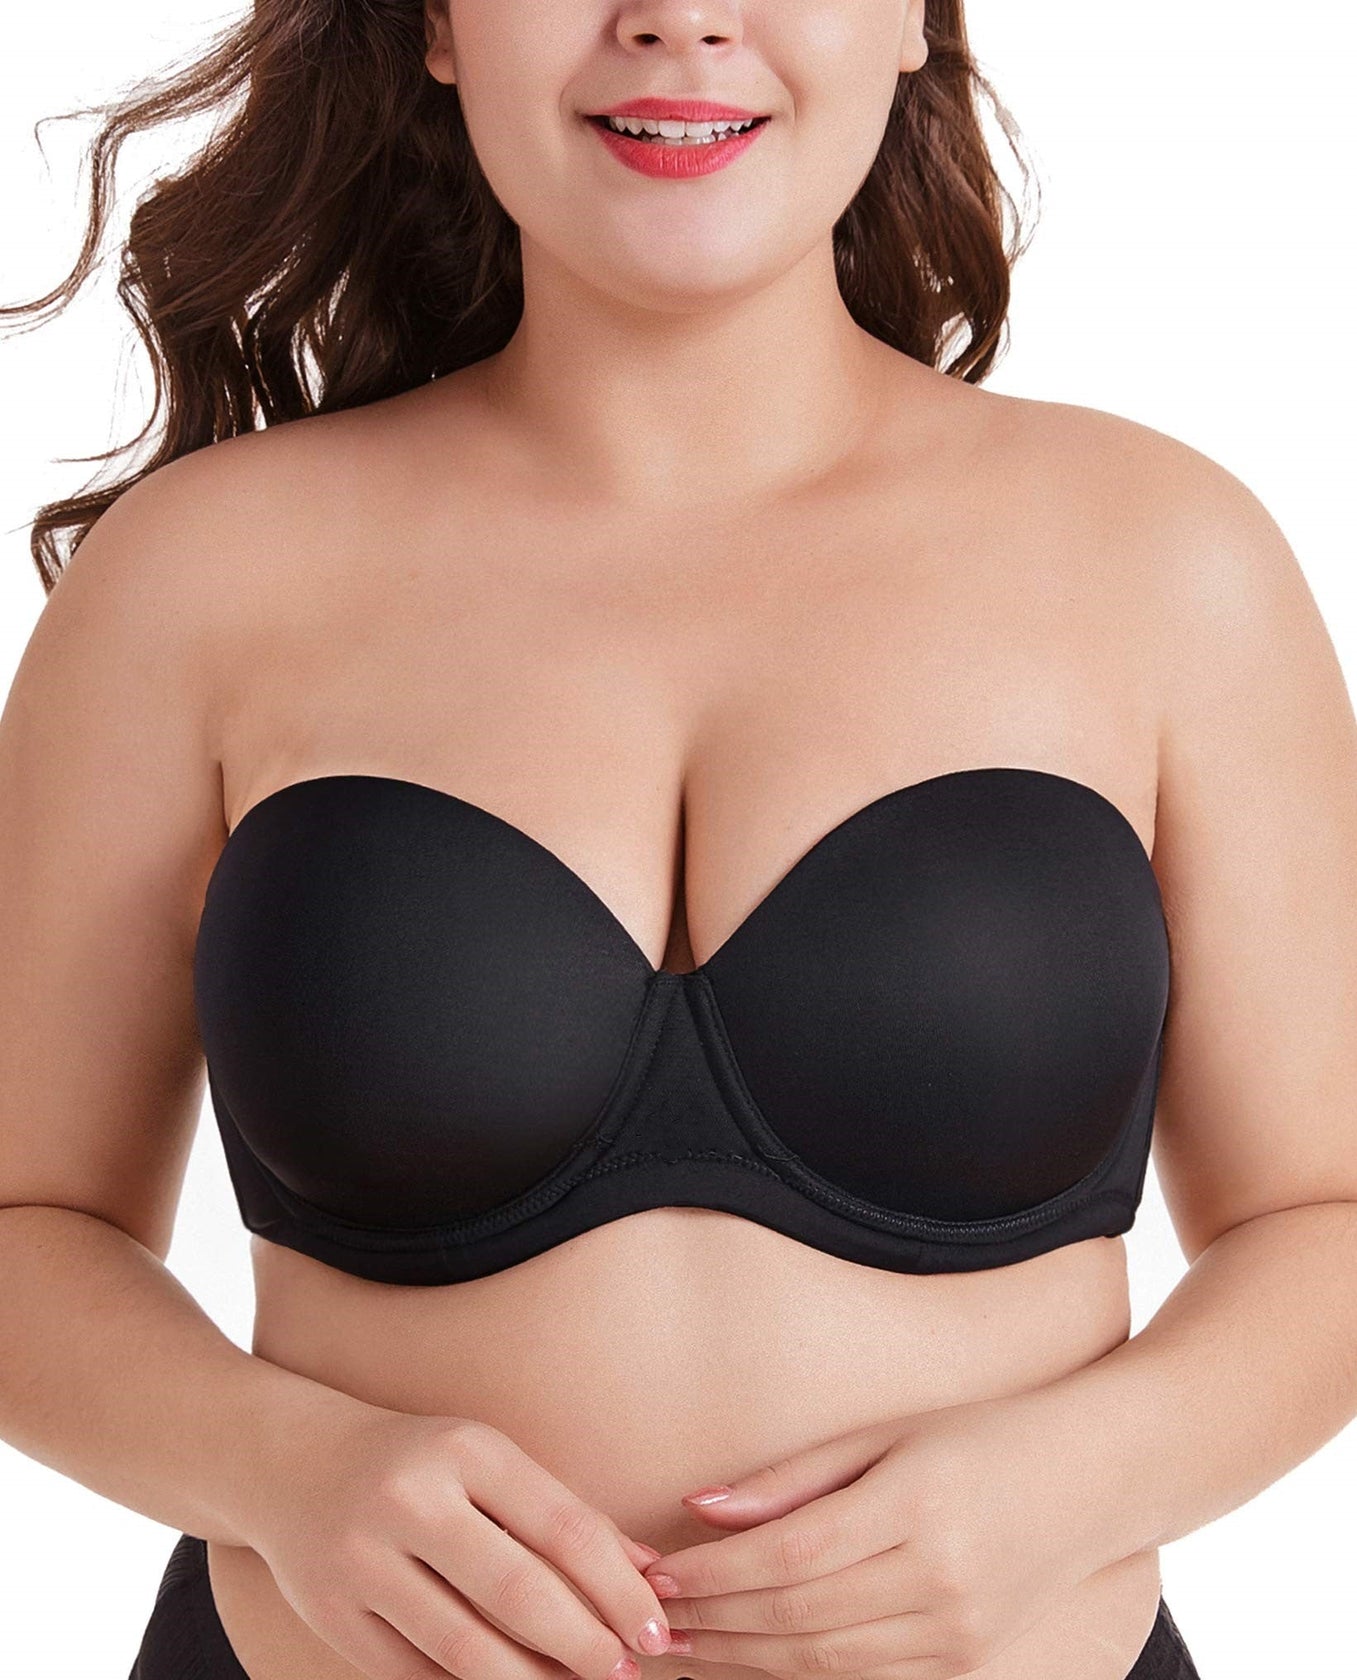 48G Bras  Buy Size 48G Bras at Betty and Belle Lingerie